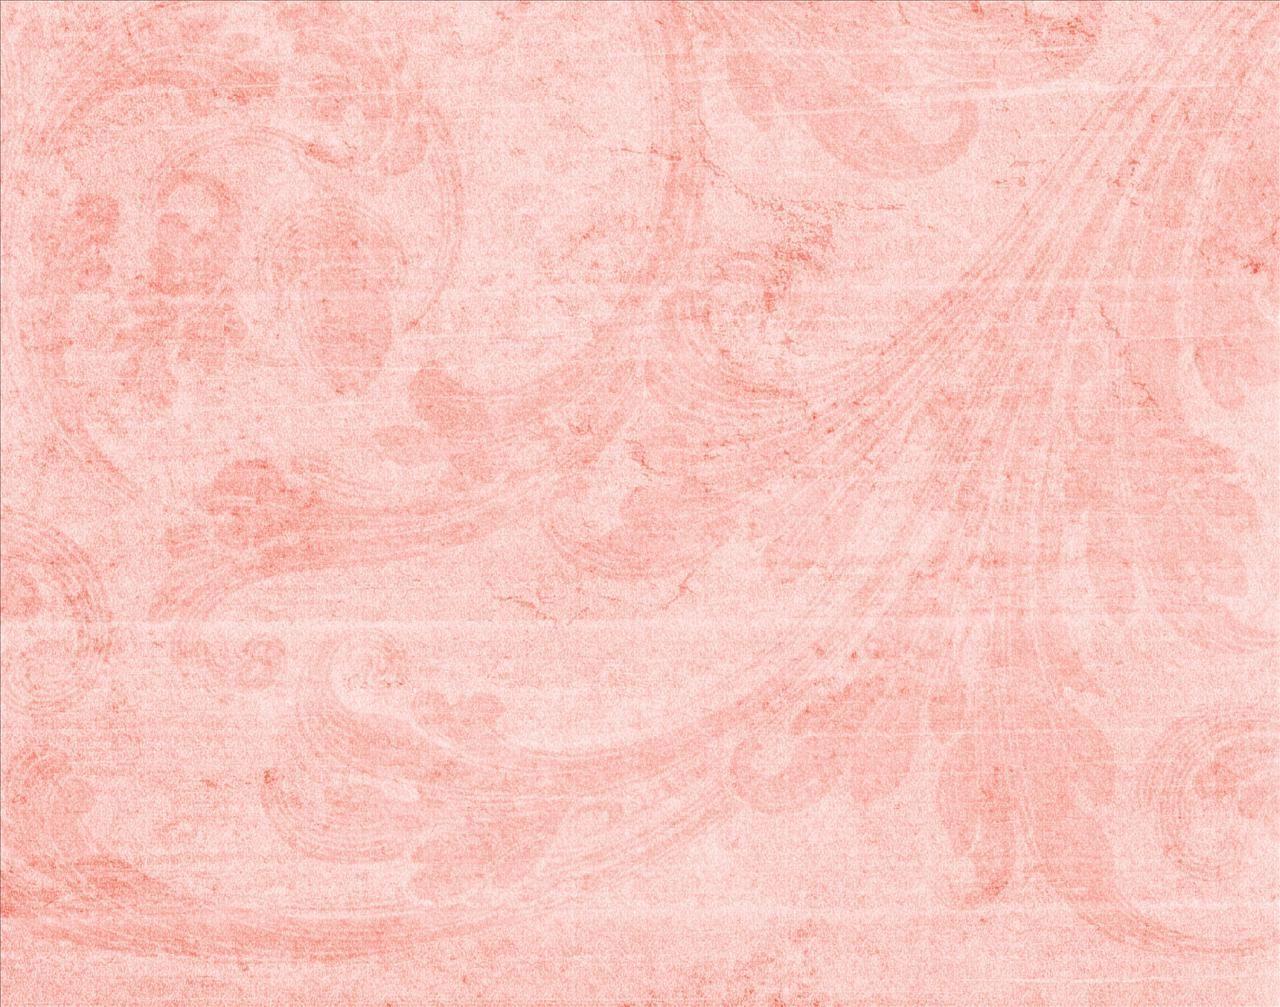 Free PowerPoint Background. Peachy Pink Free PPT Background